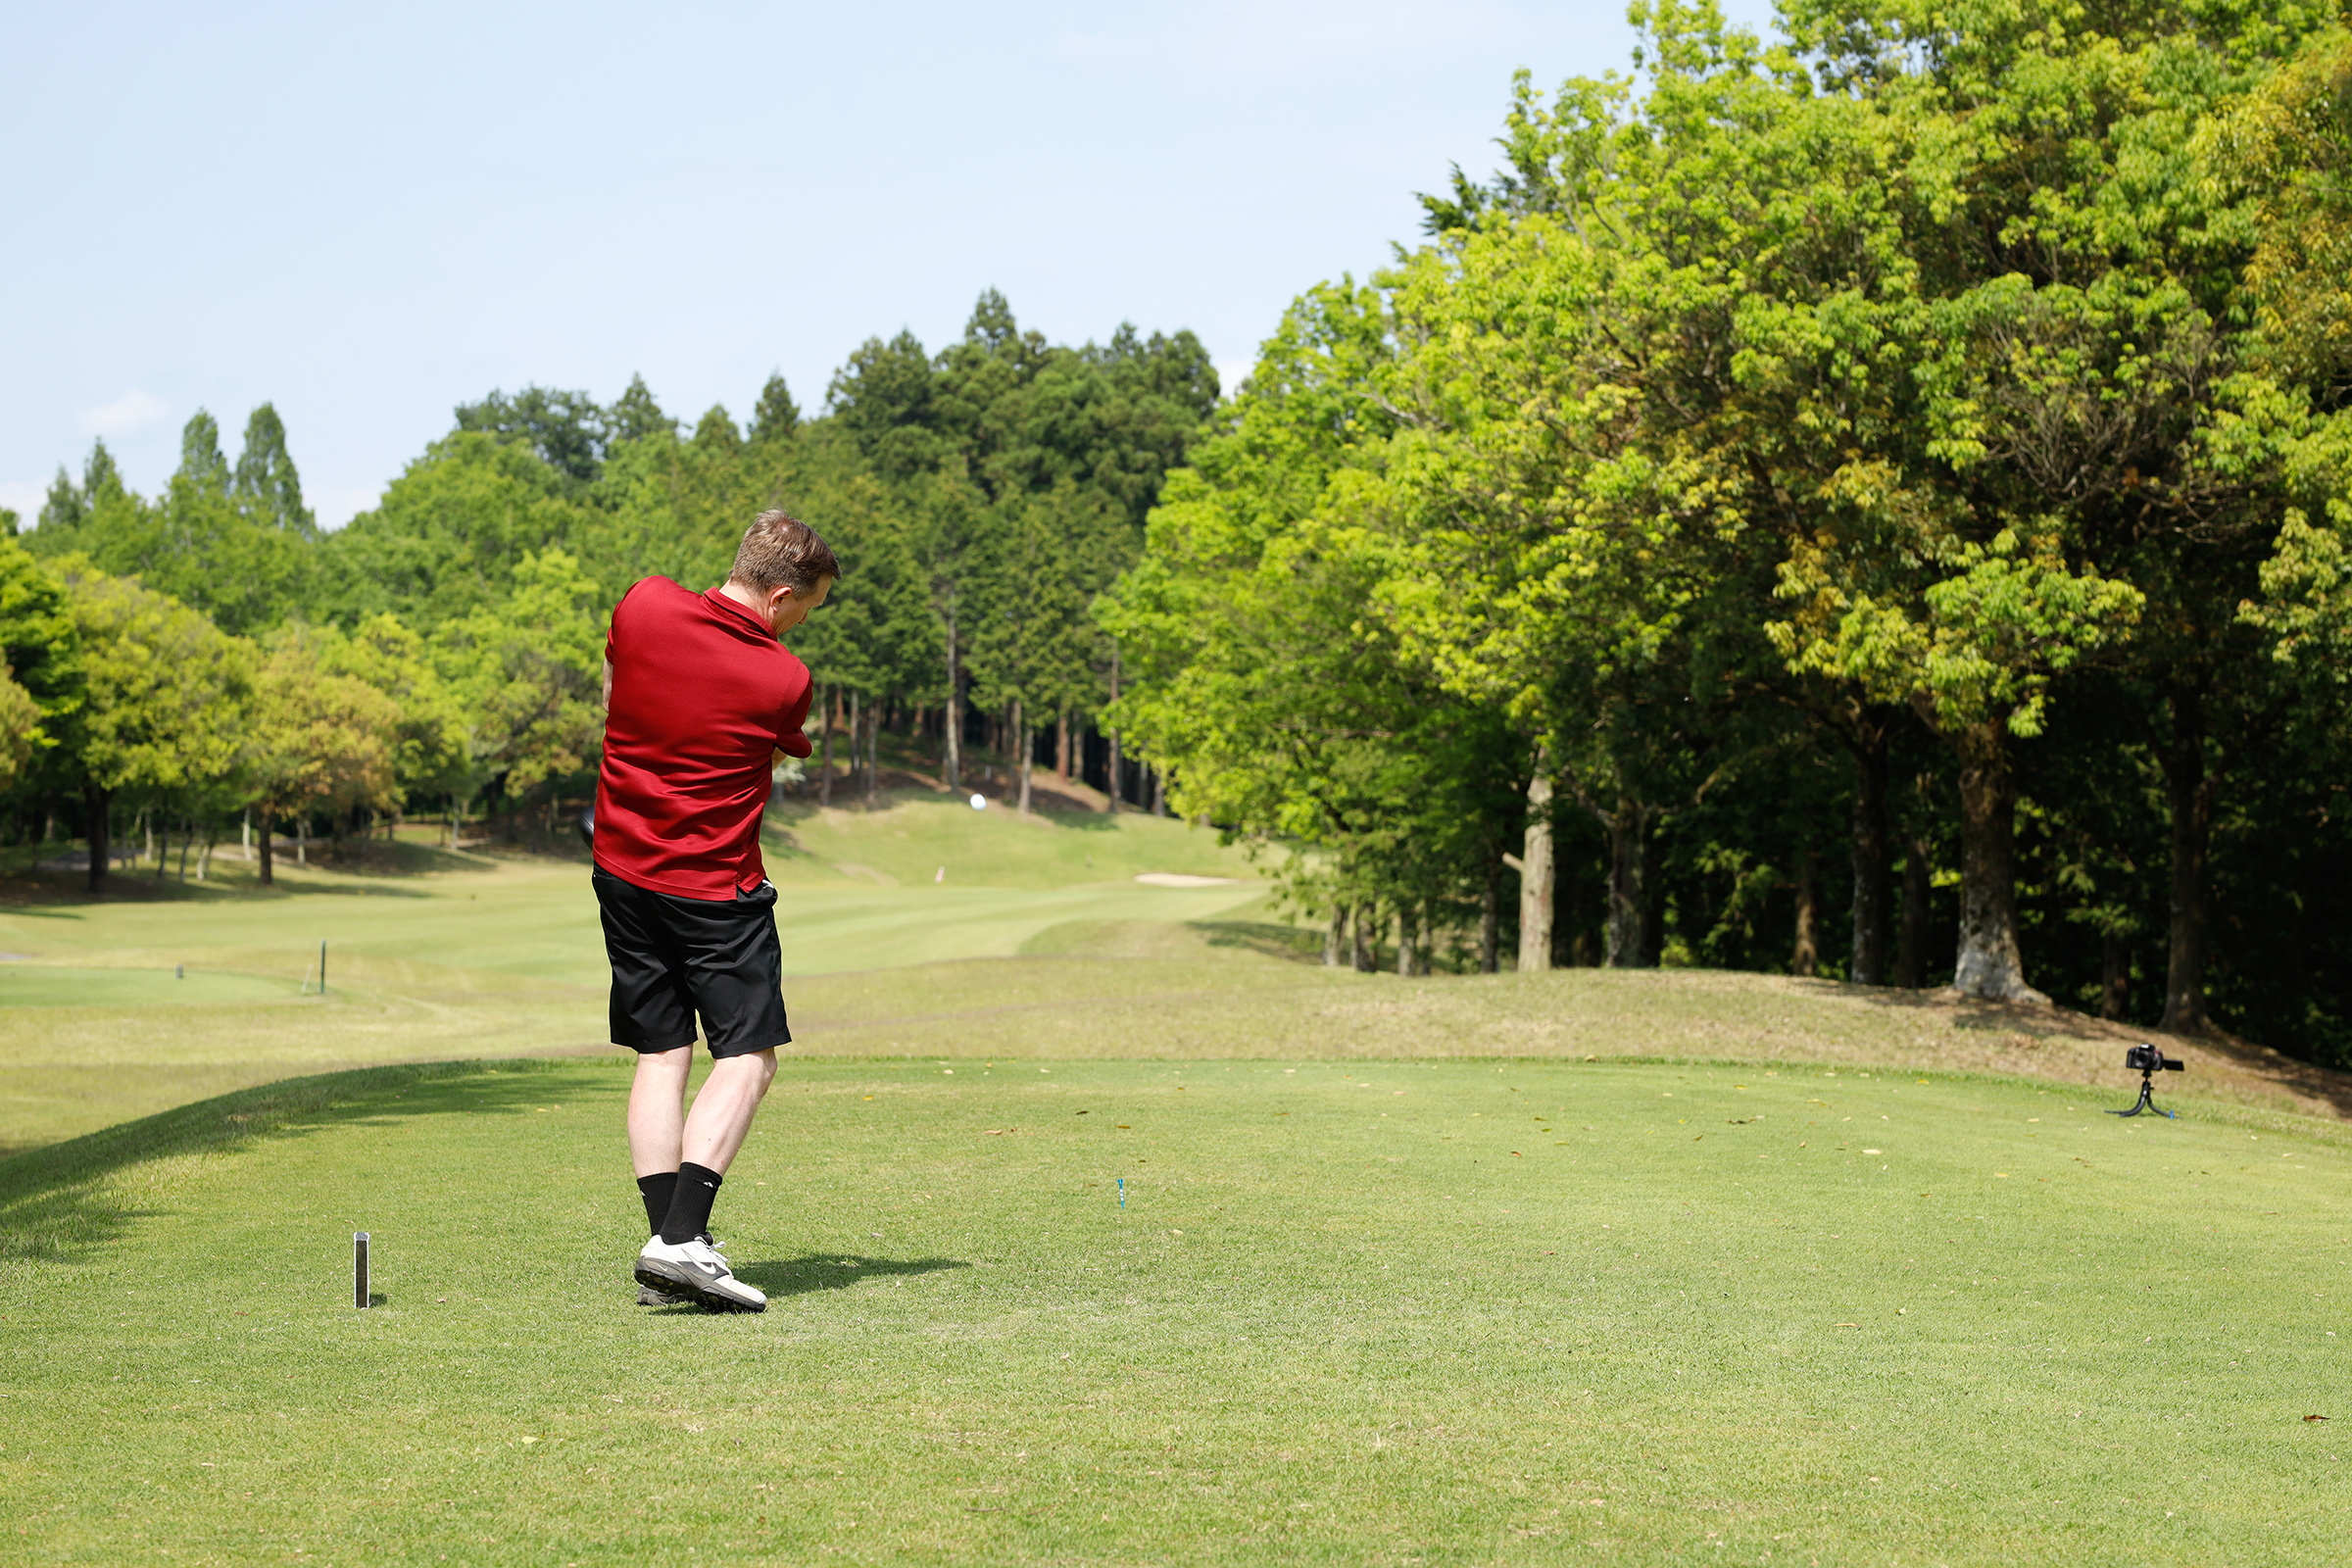 Dean Wilson tees off at the inaugural TUJ golf event in Tochigi Prefecture. Photo by Anthony Smith (TUJ Student)